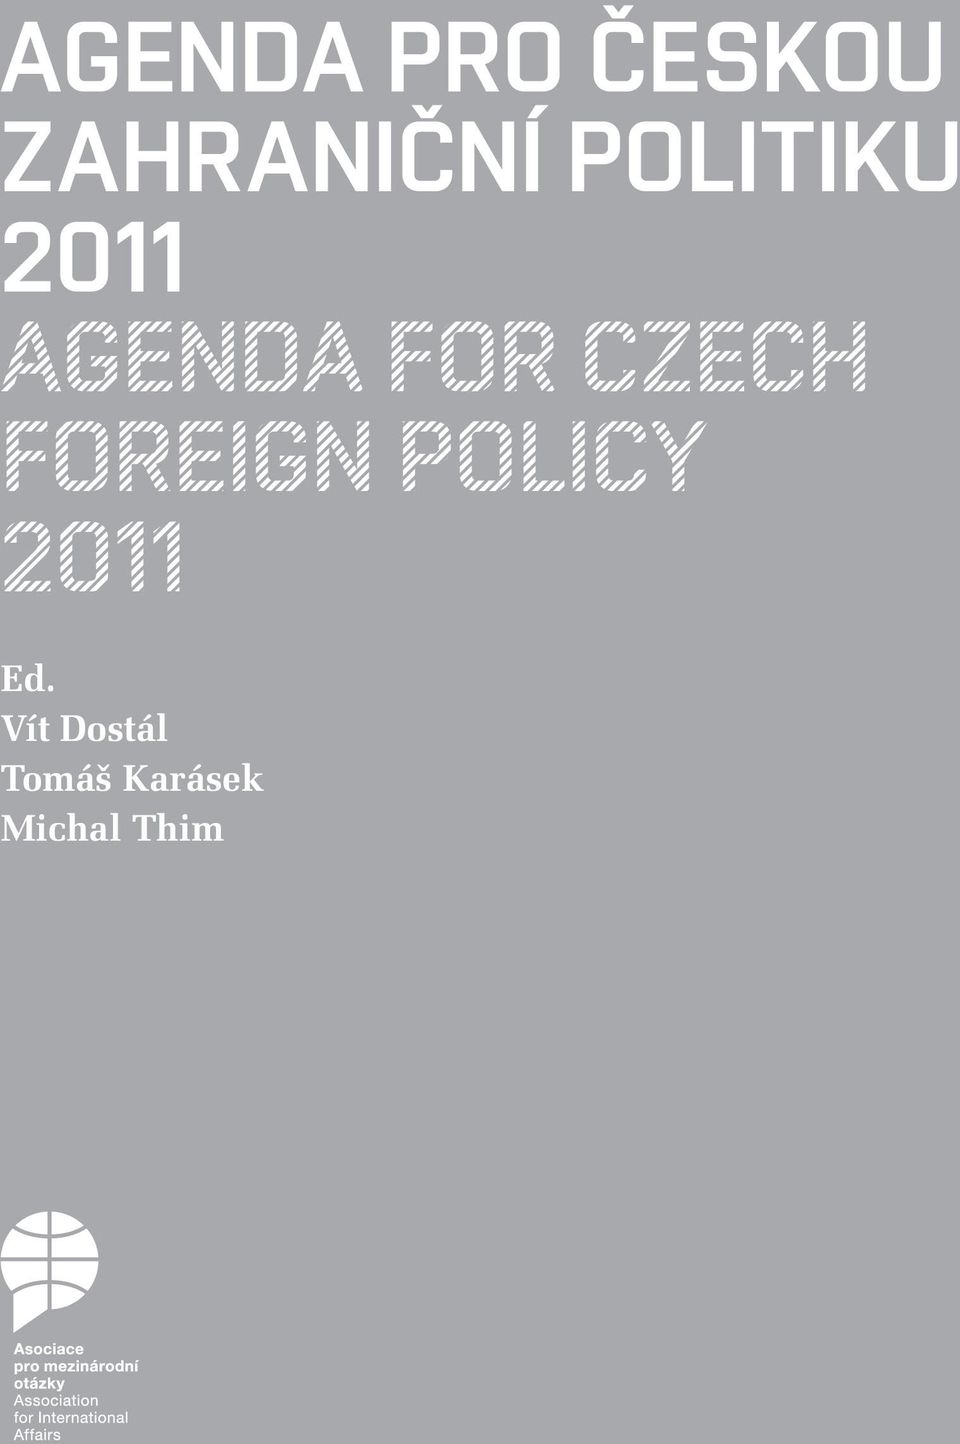 CZECH FOREIGN POLICY 2011 Ed.